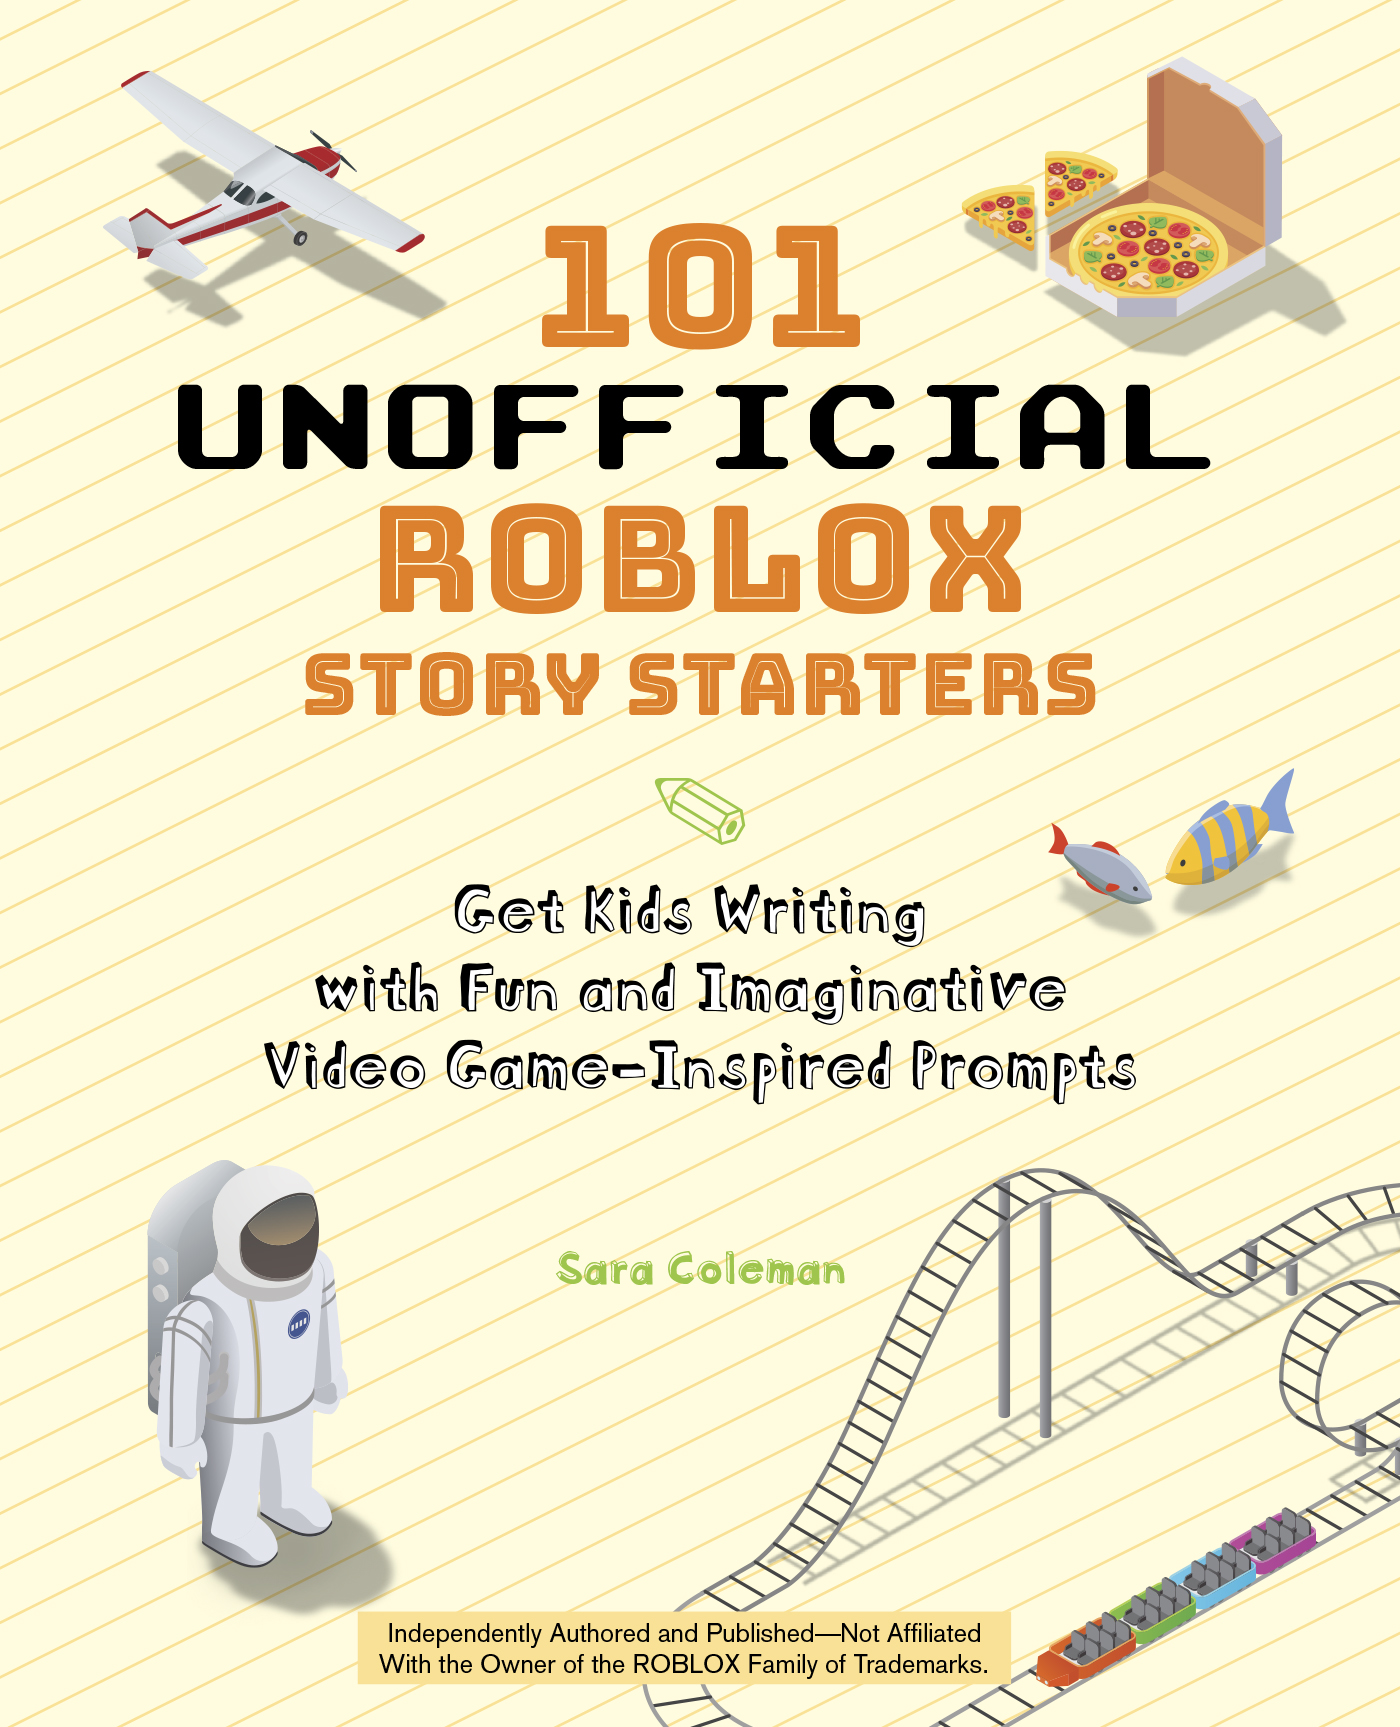 101 Unofficial Roblox Story Starters | Ulysses Press